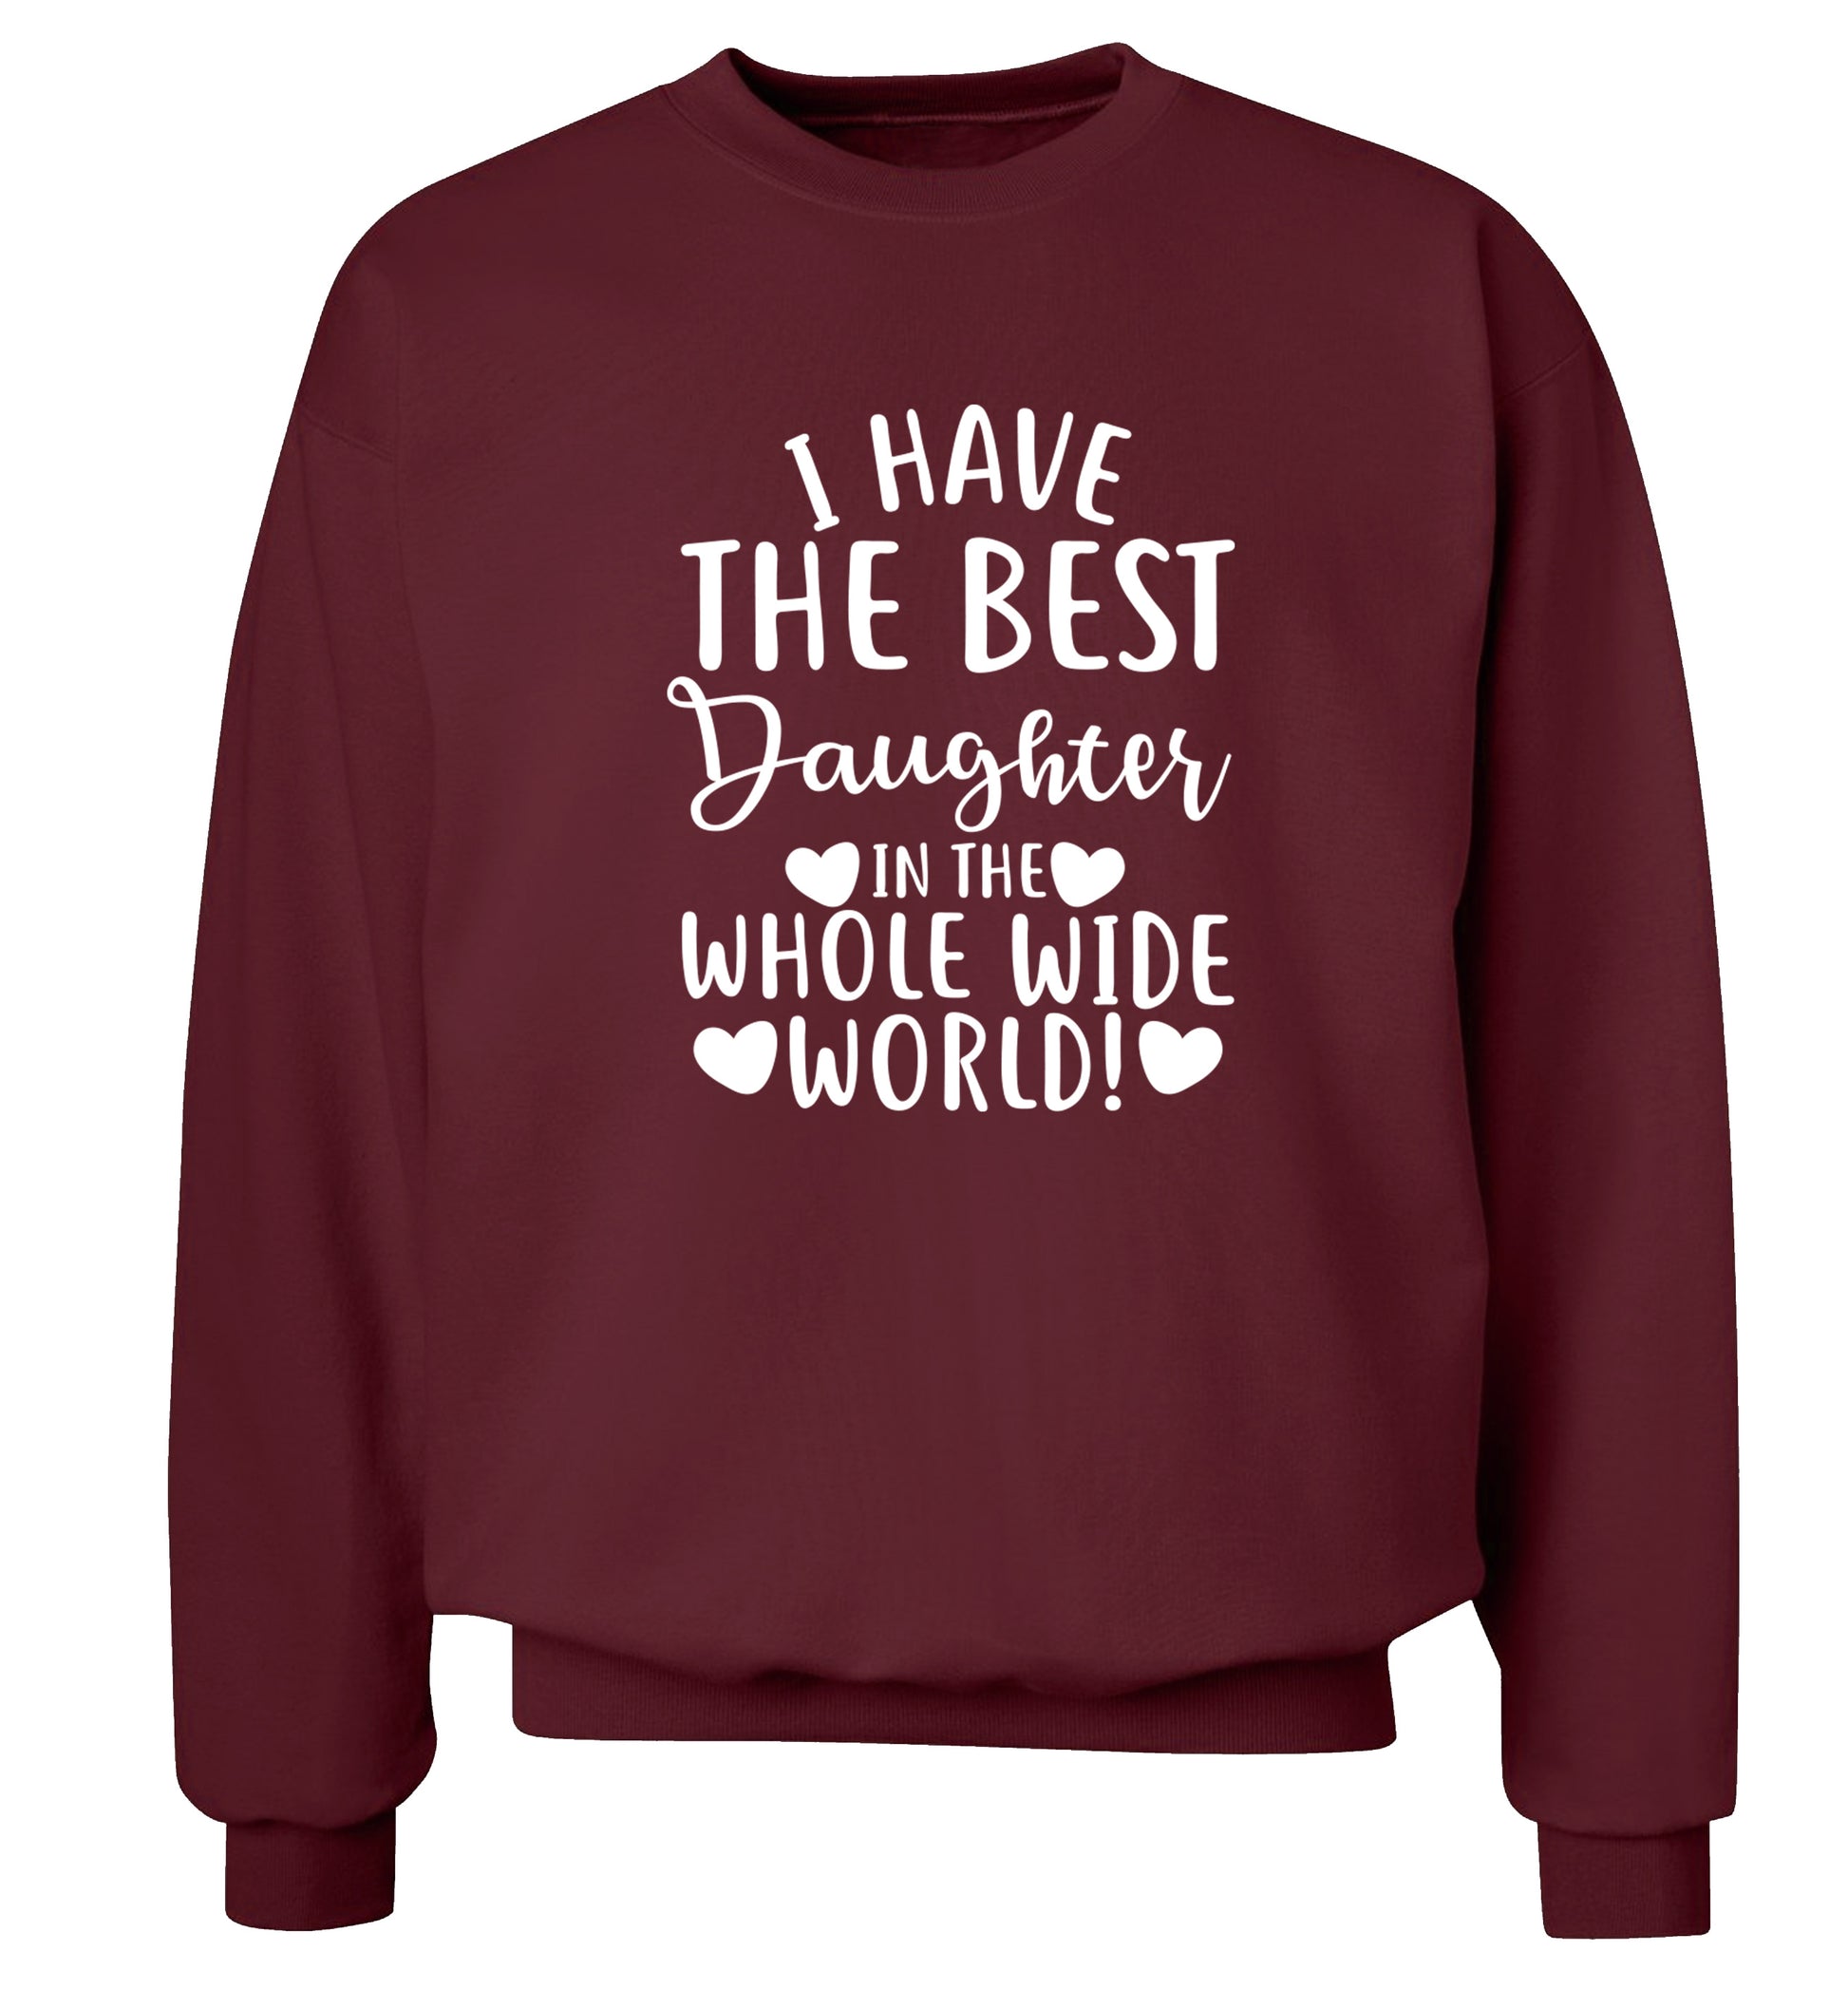 I have the best daughter in the whole wide world! Adult's unisex maroon Sweater 2XL